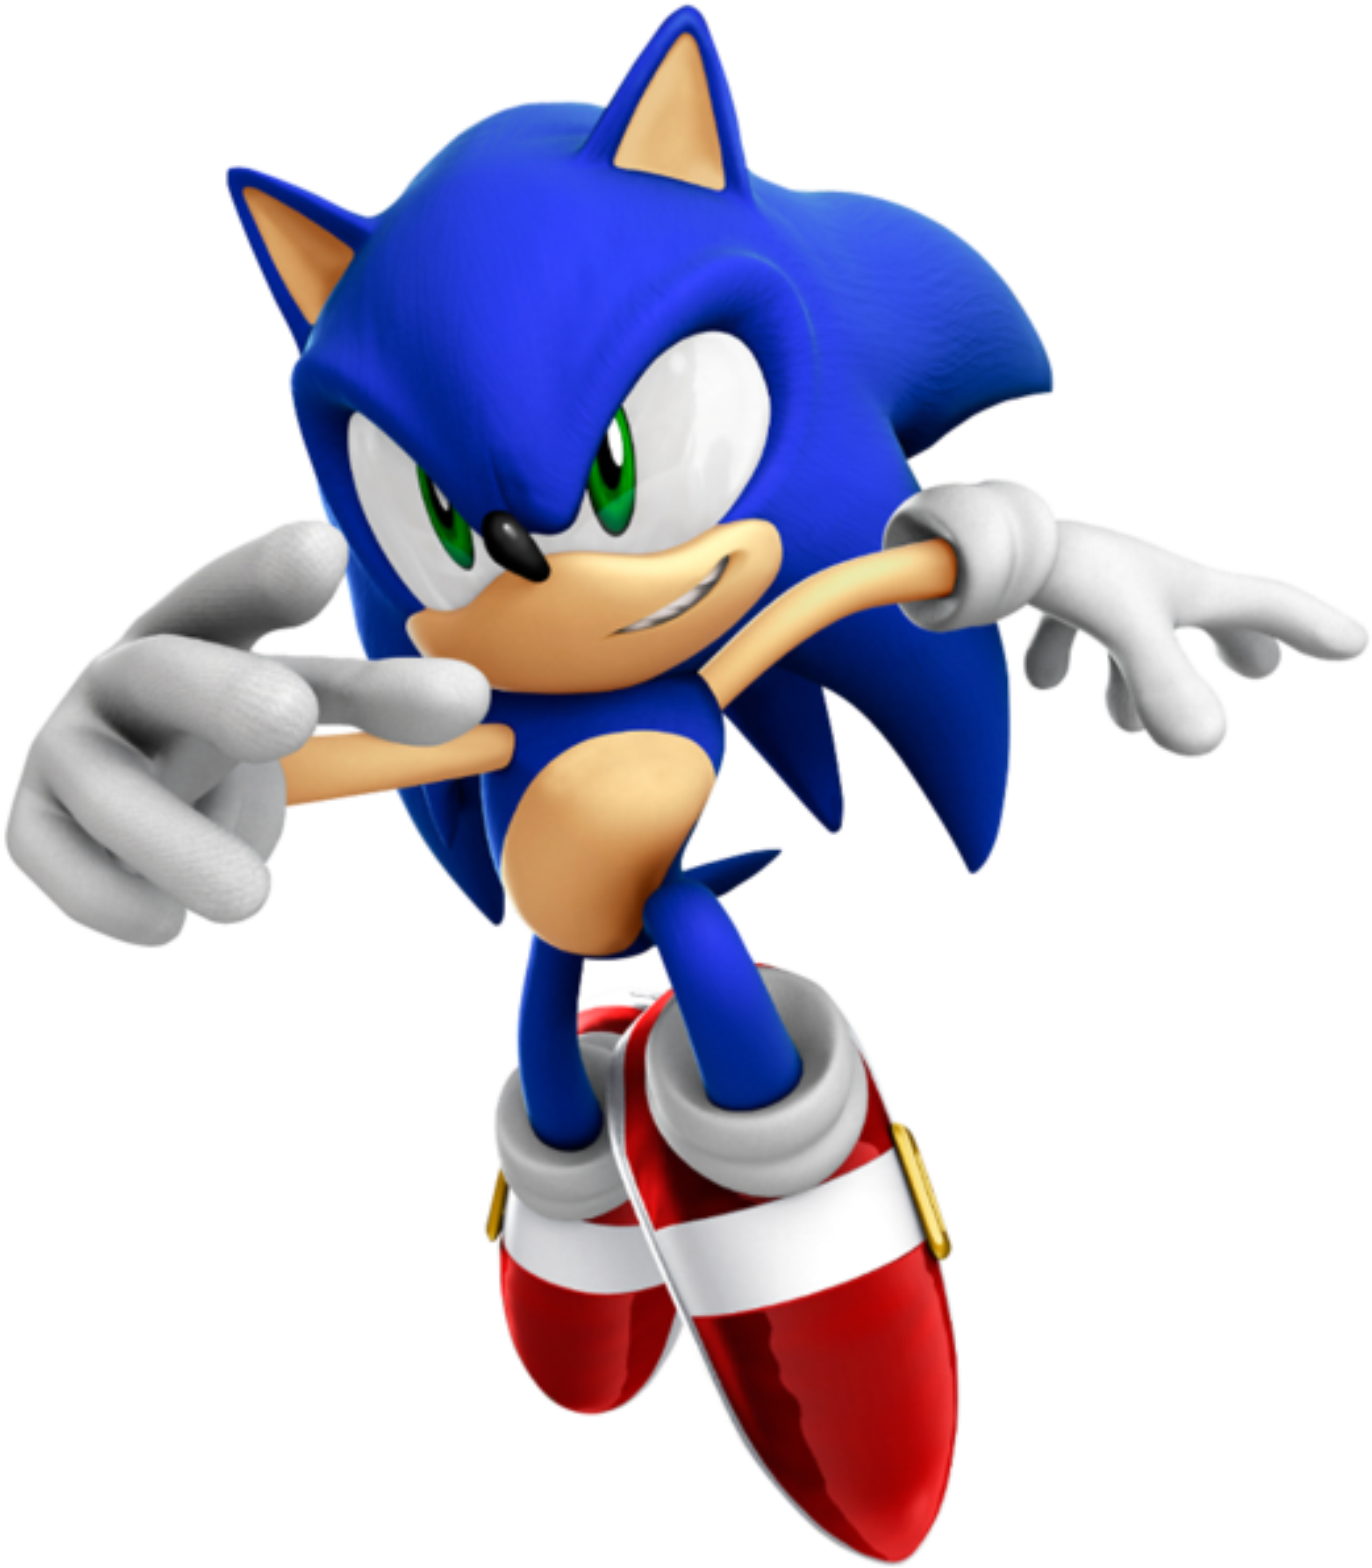 Download Sonic - Sonic The Hedgehog 2006 Sonic PNG Image with No ...